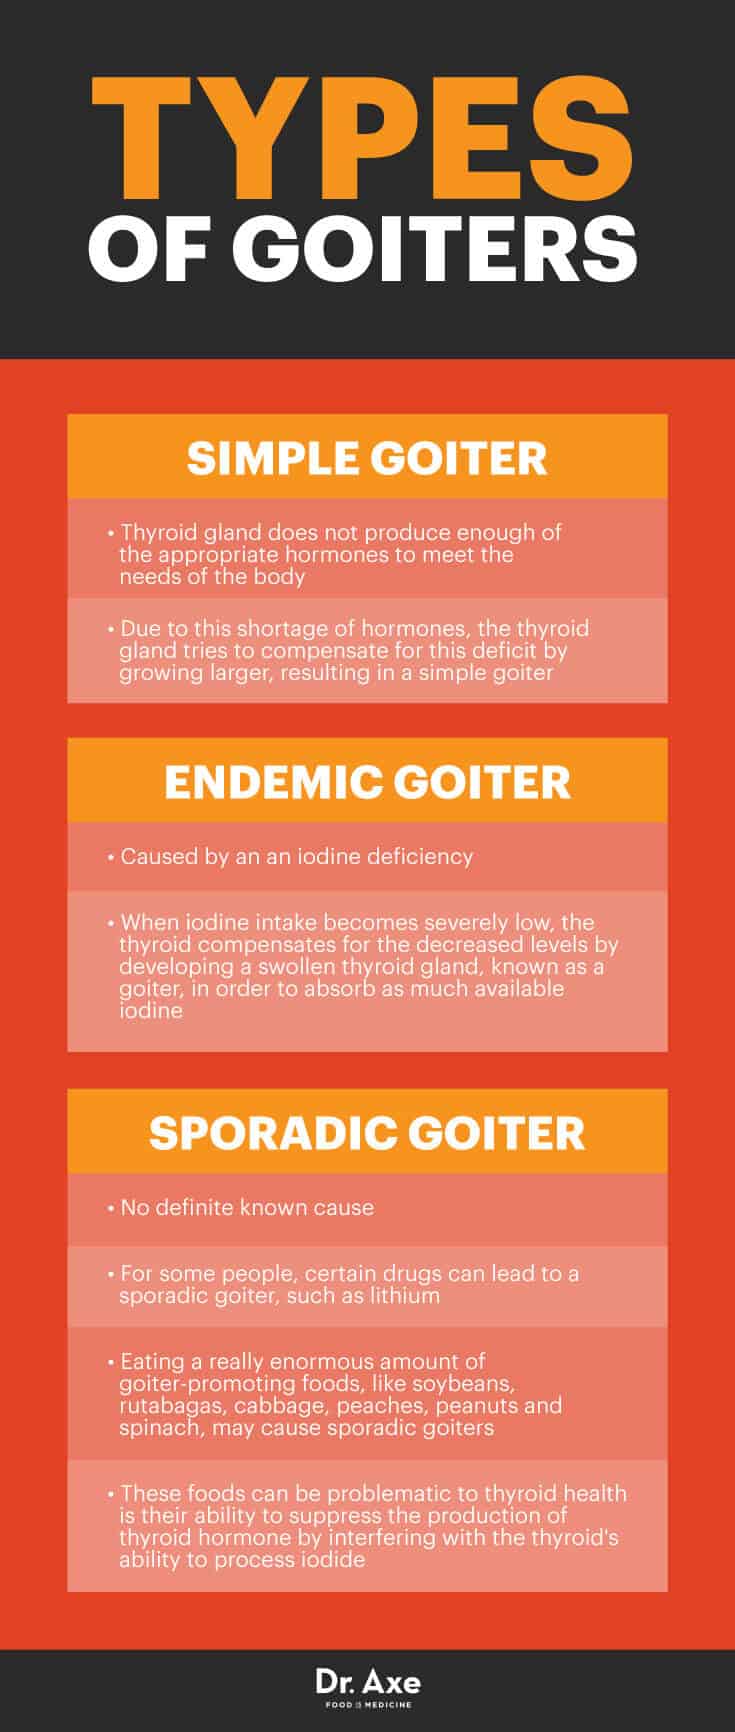 Types of goiters - Dr. Axe